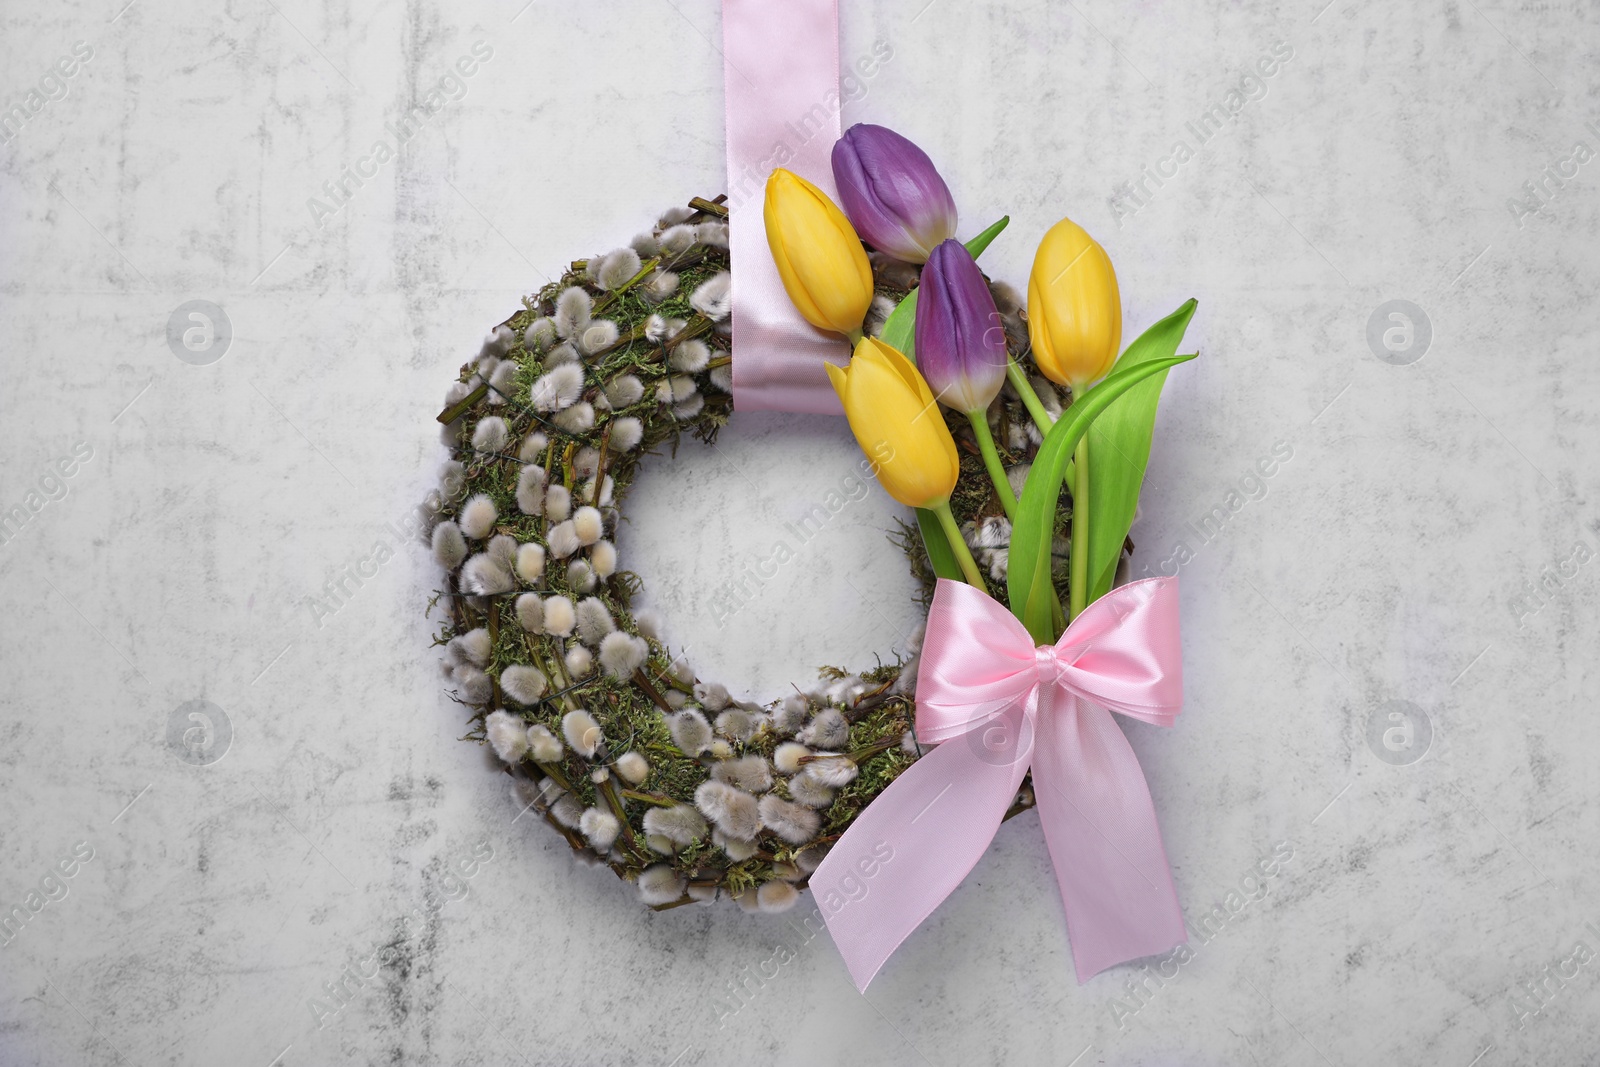 Photo of Wreath made of beautiful willow, colorful tulip flowers and pink bow hanging on light background